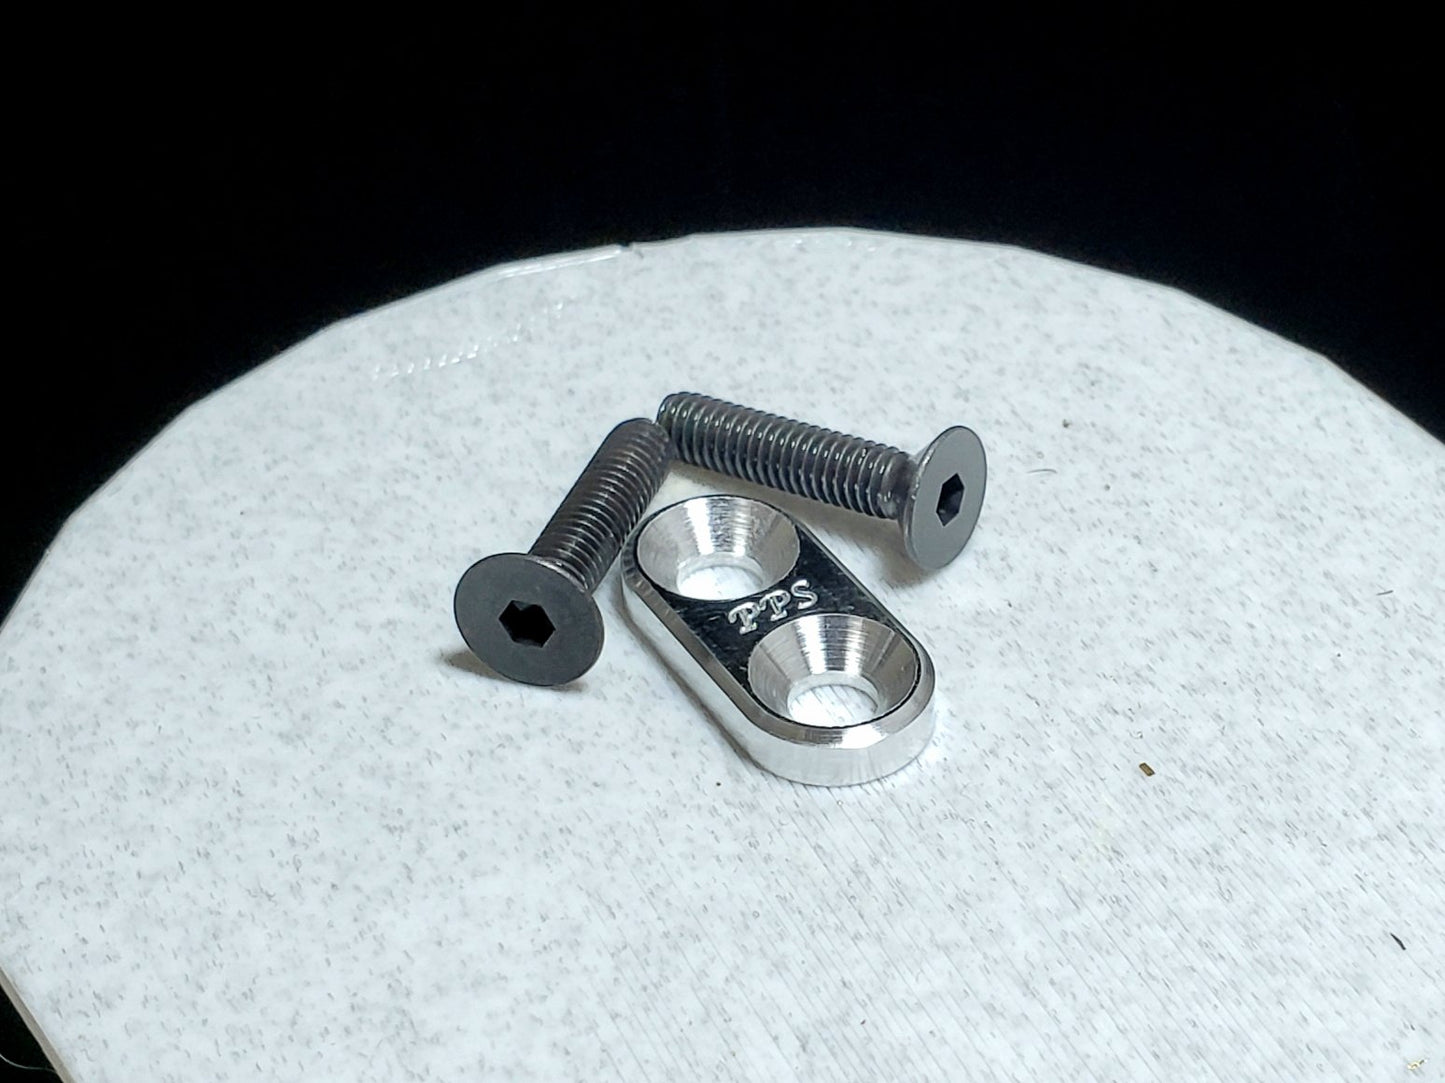 Replacement parts for the V4 Screw Adjust Mount